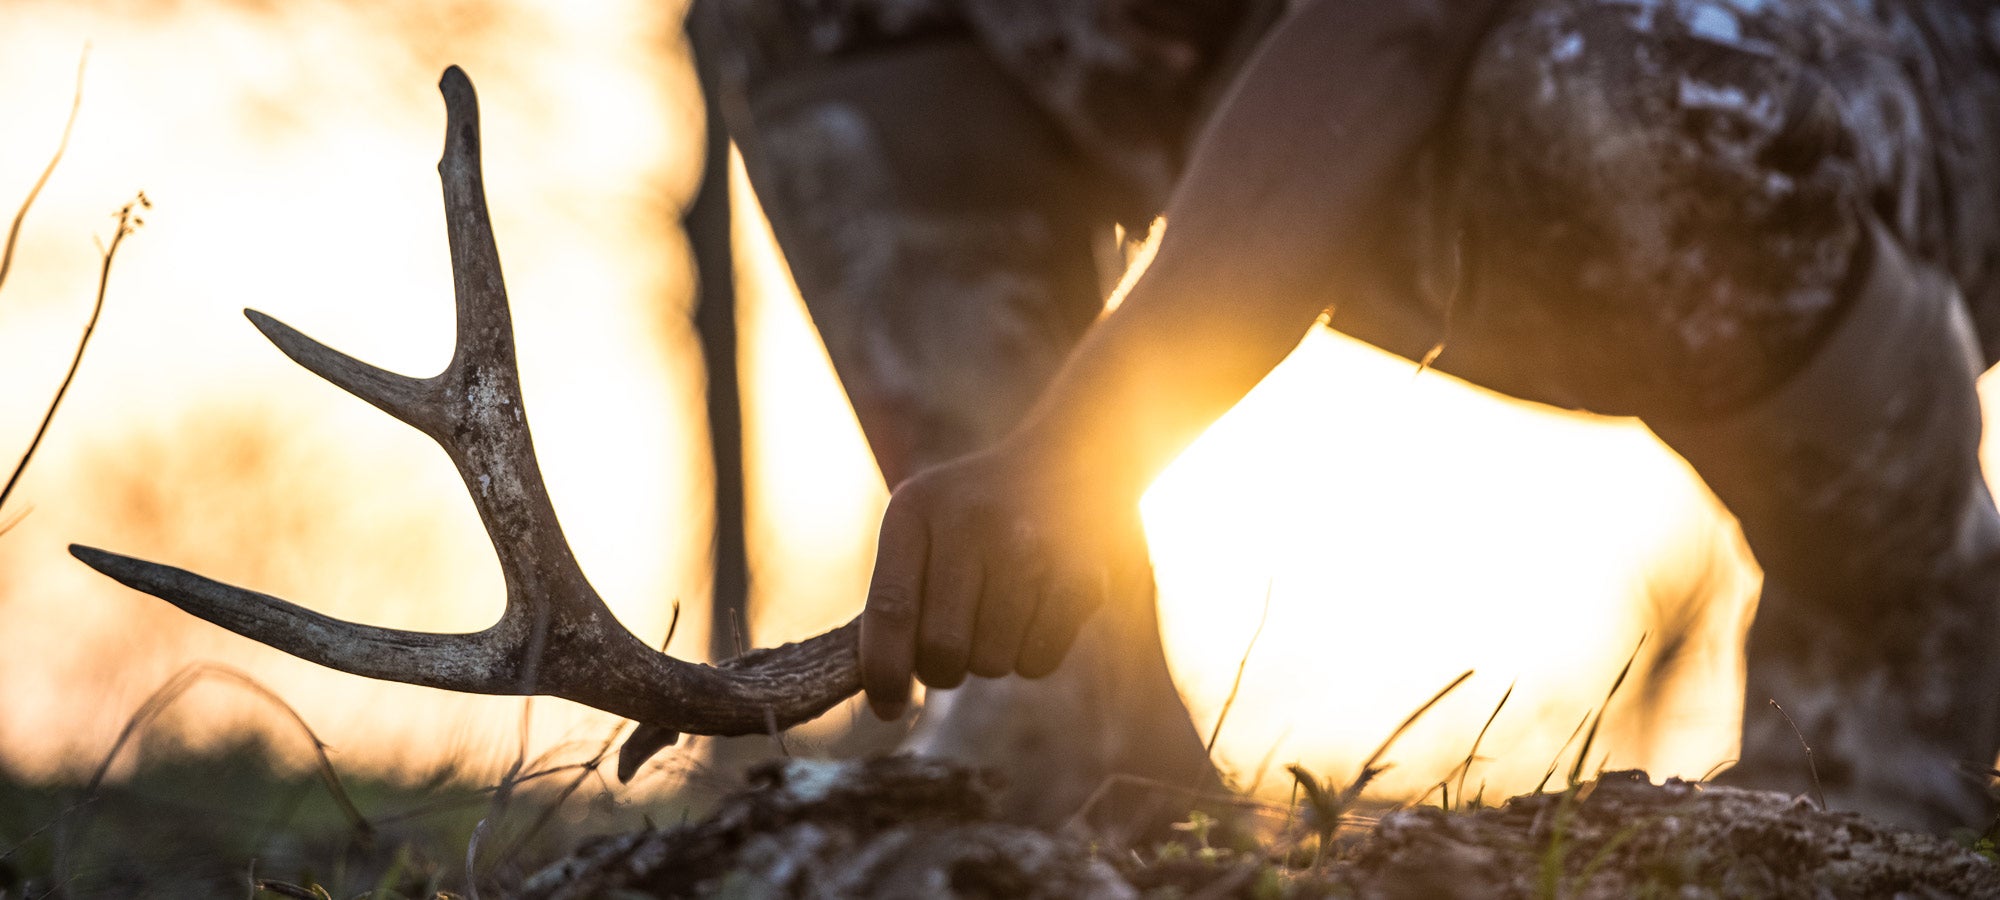 20 Tips for Finding More Shed Antlers